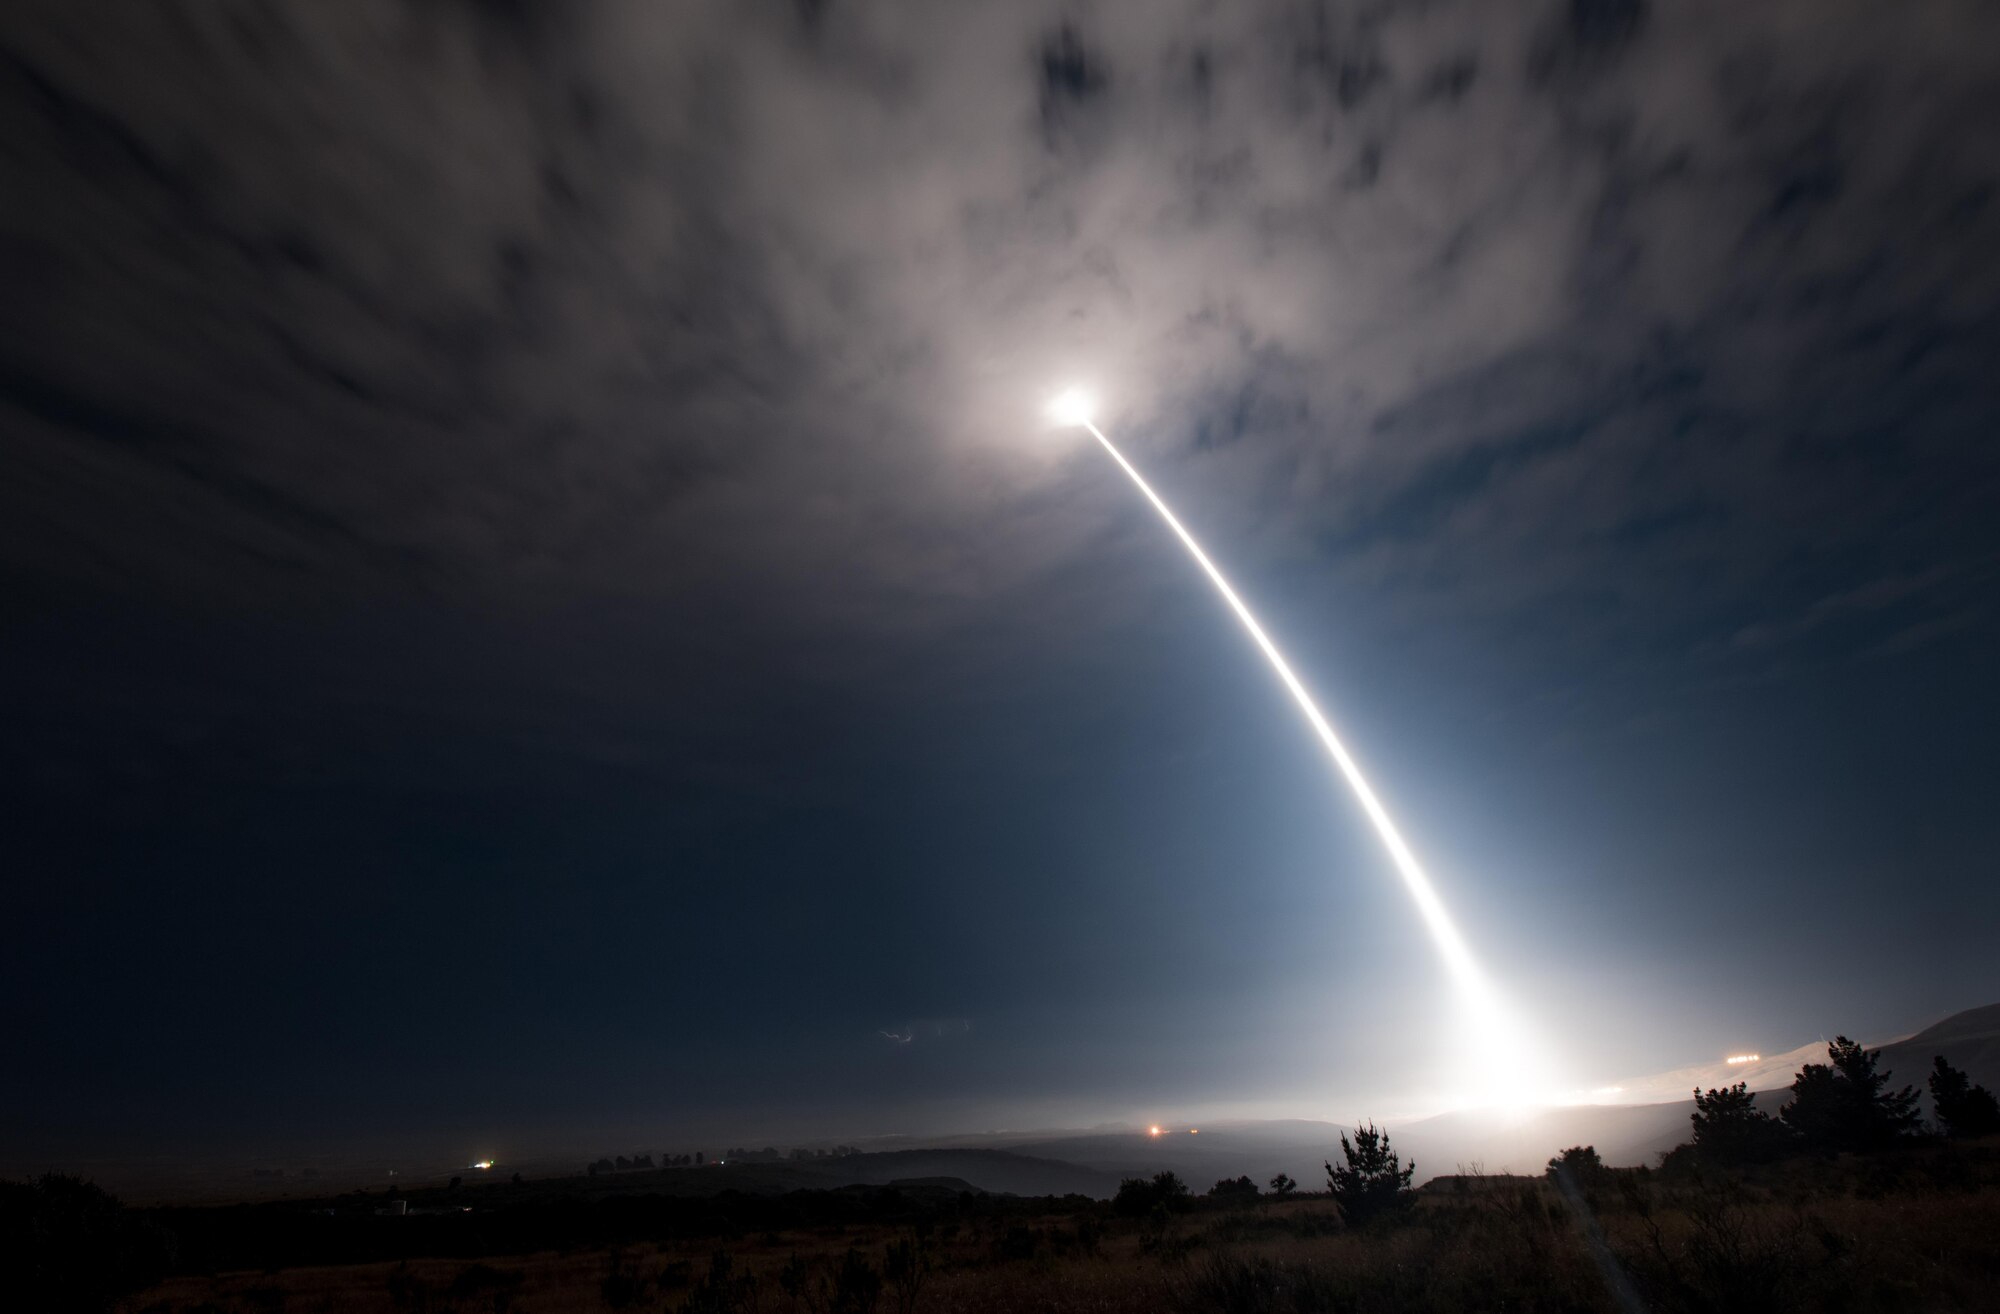 Missile test launch at night.